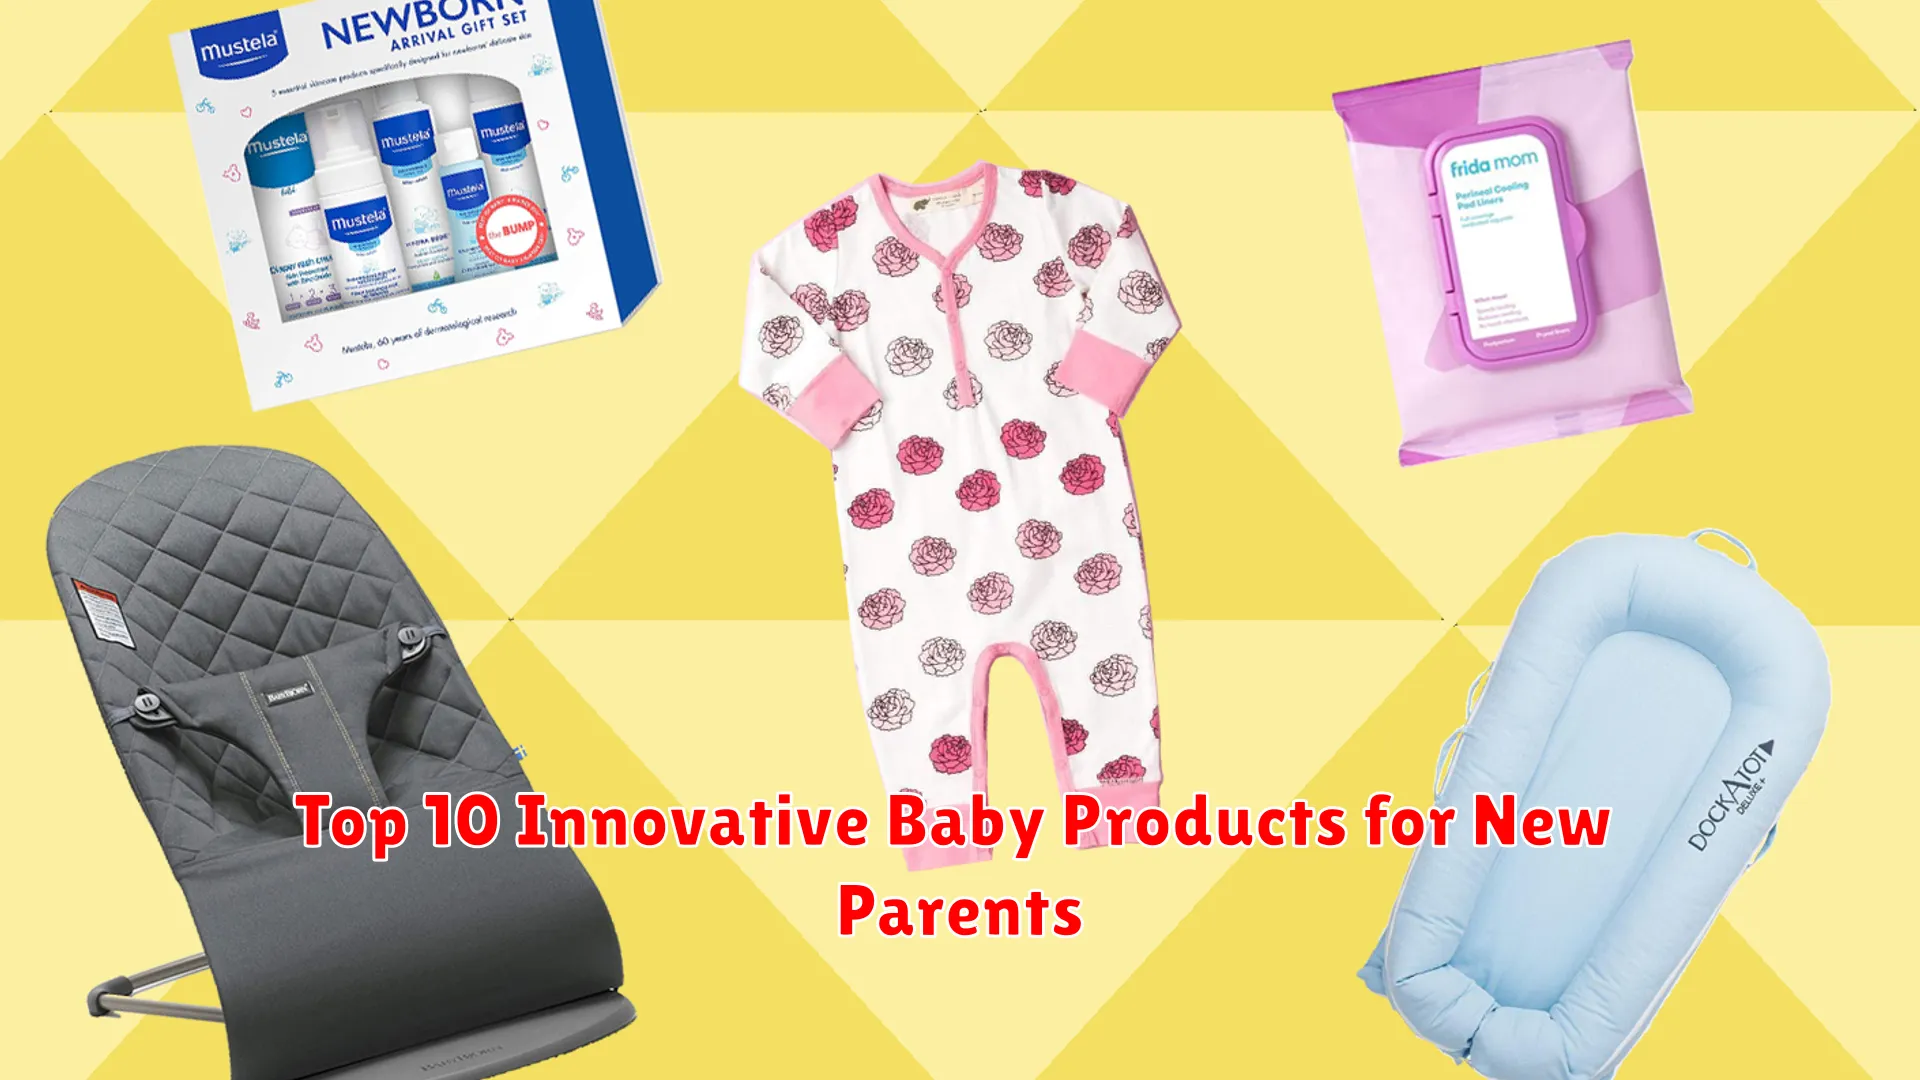 Top 10 Innovative Baby Products for New Parents